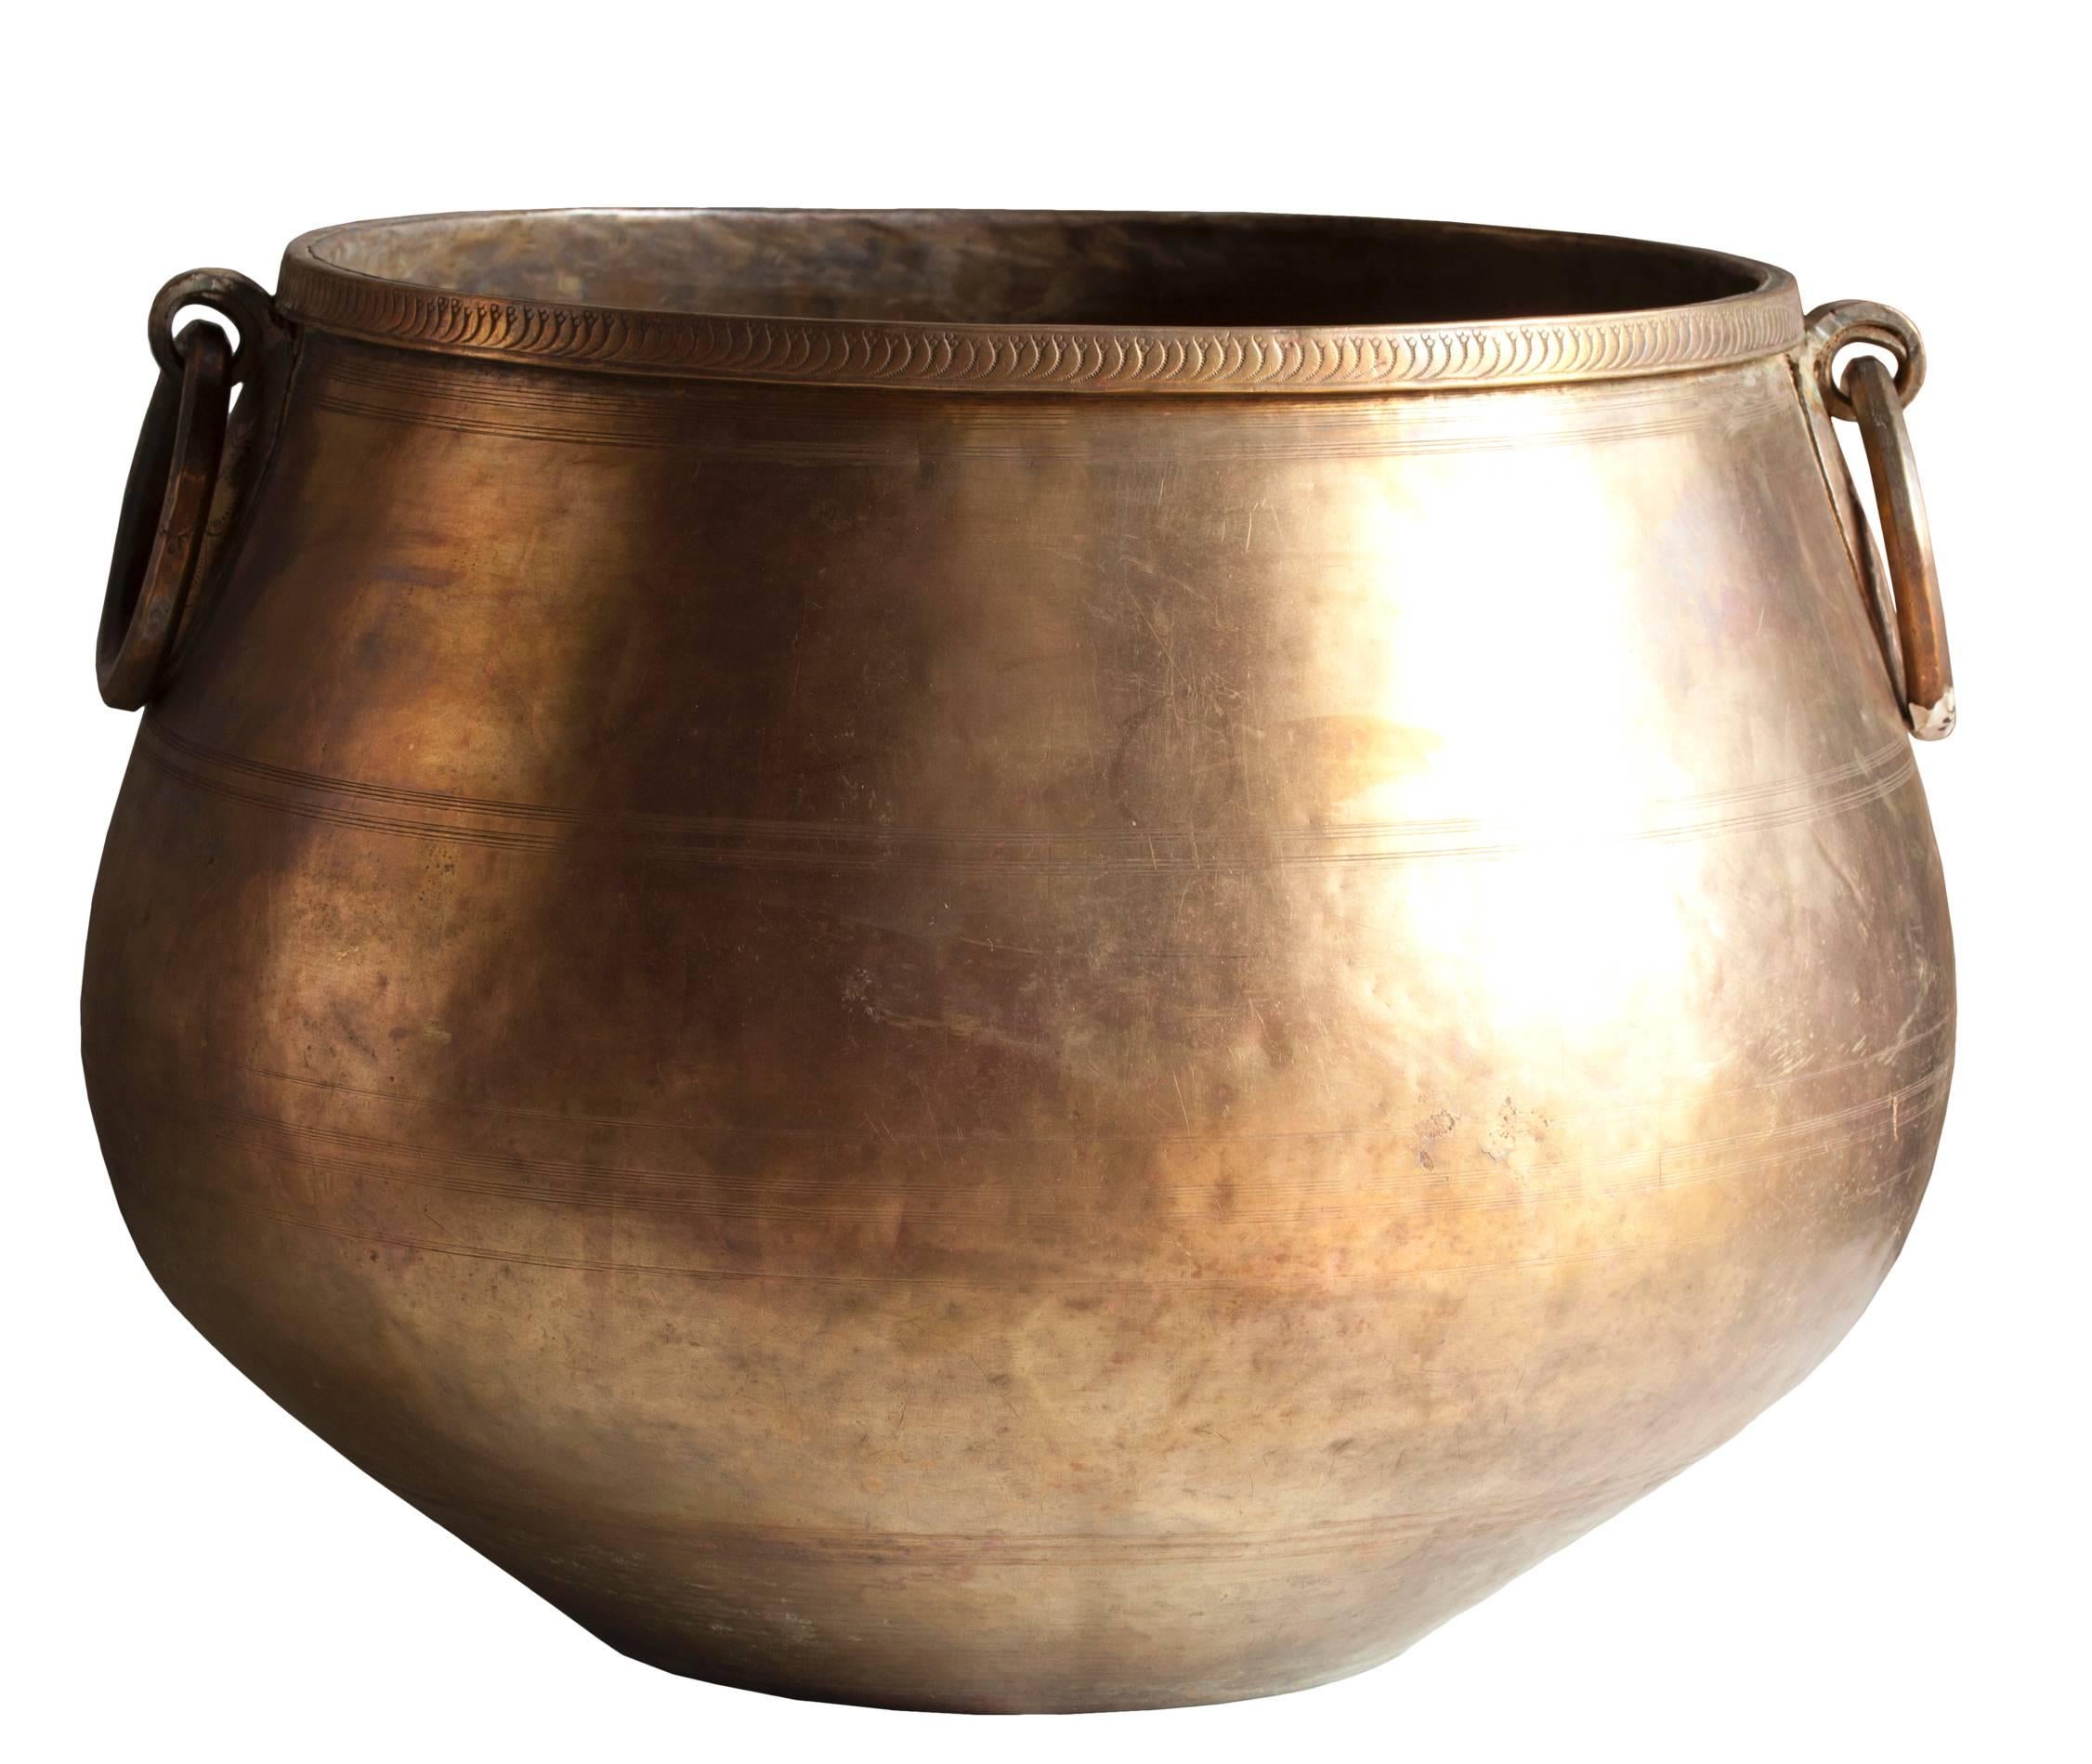 Elegant bronze planter with brass, hand-tooled detailing along the rim and under the handles. Early 1900s Southeast Asia. Great size. The belly measures 19